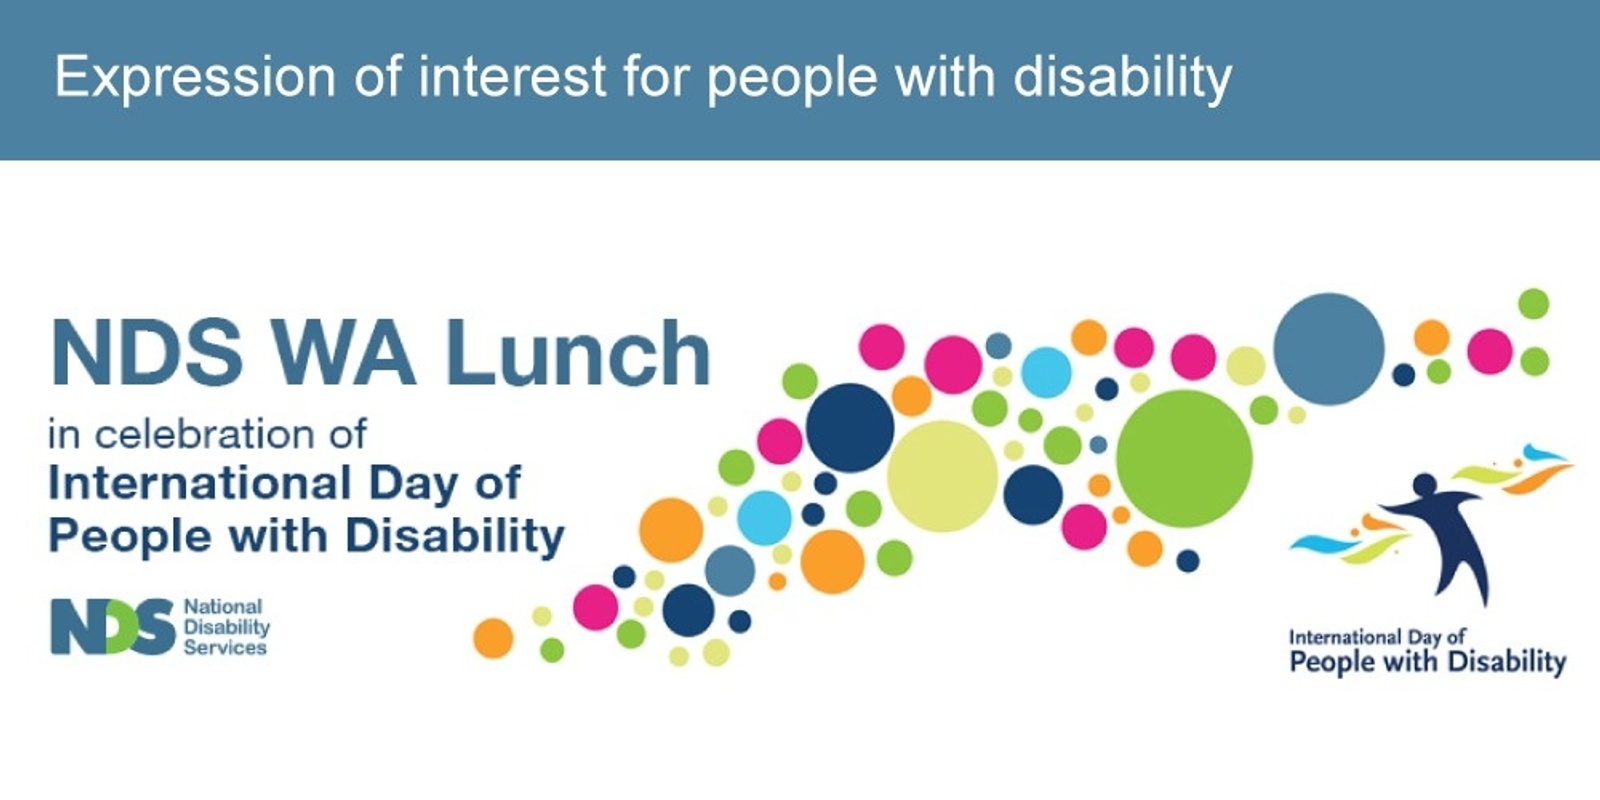 Banner image for NDS in WA Lunch in Celebration of International Day of People with Disability - Expressions of Interest for People with Disability